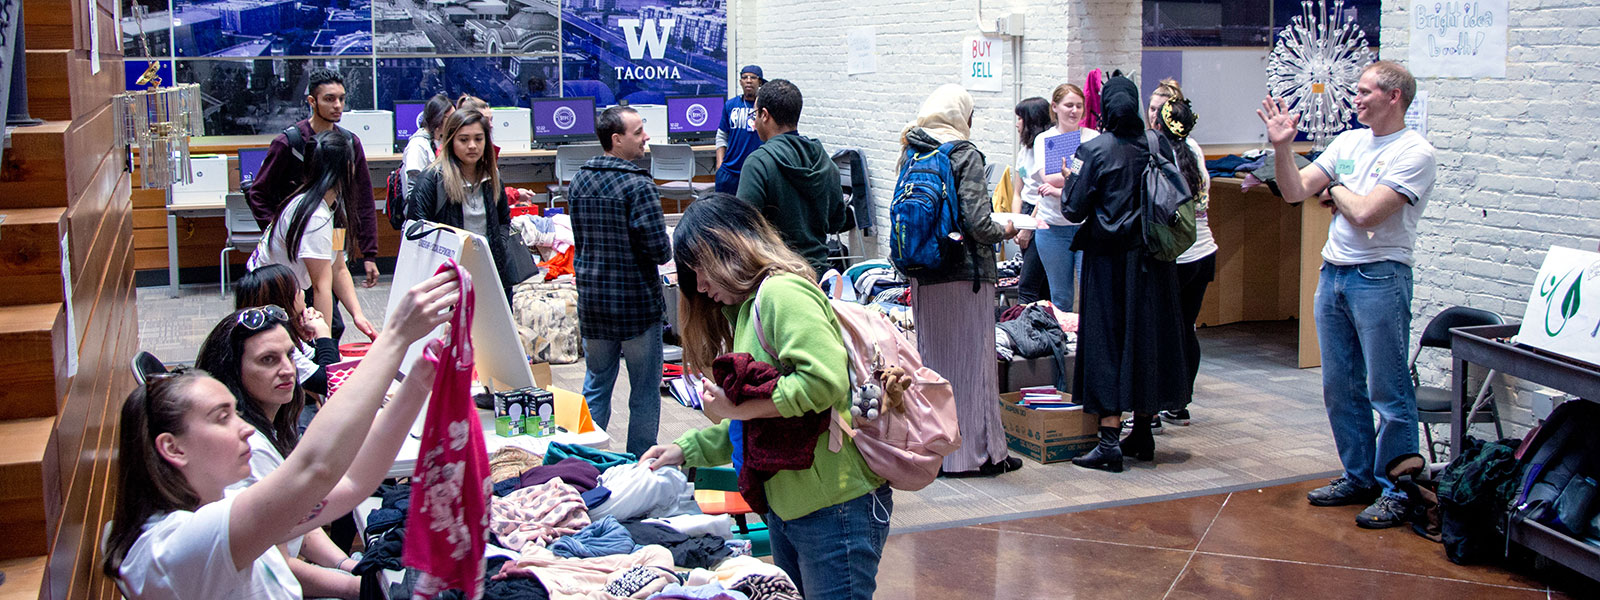 People looking at merchandise at UW Tacoma swap meet in West Coast Grocery atrium.